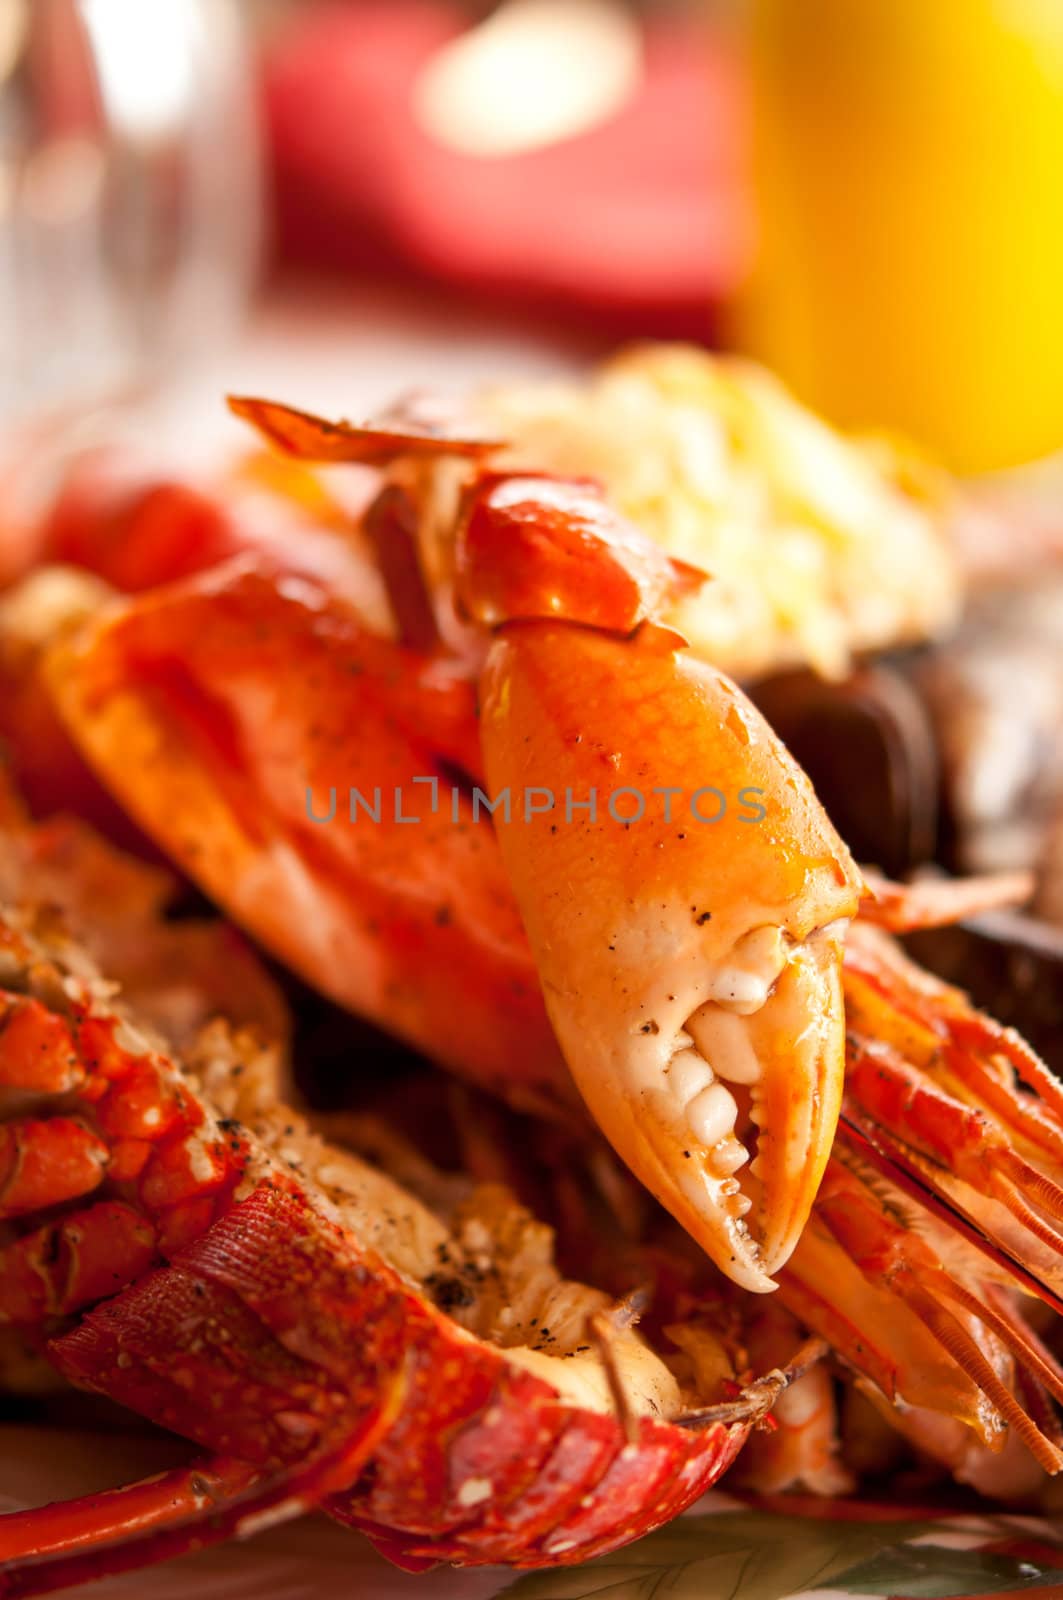 Dish with cooked crabs and lobsters with selective focus on the crab nipper